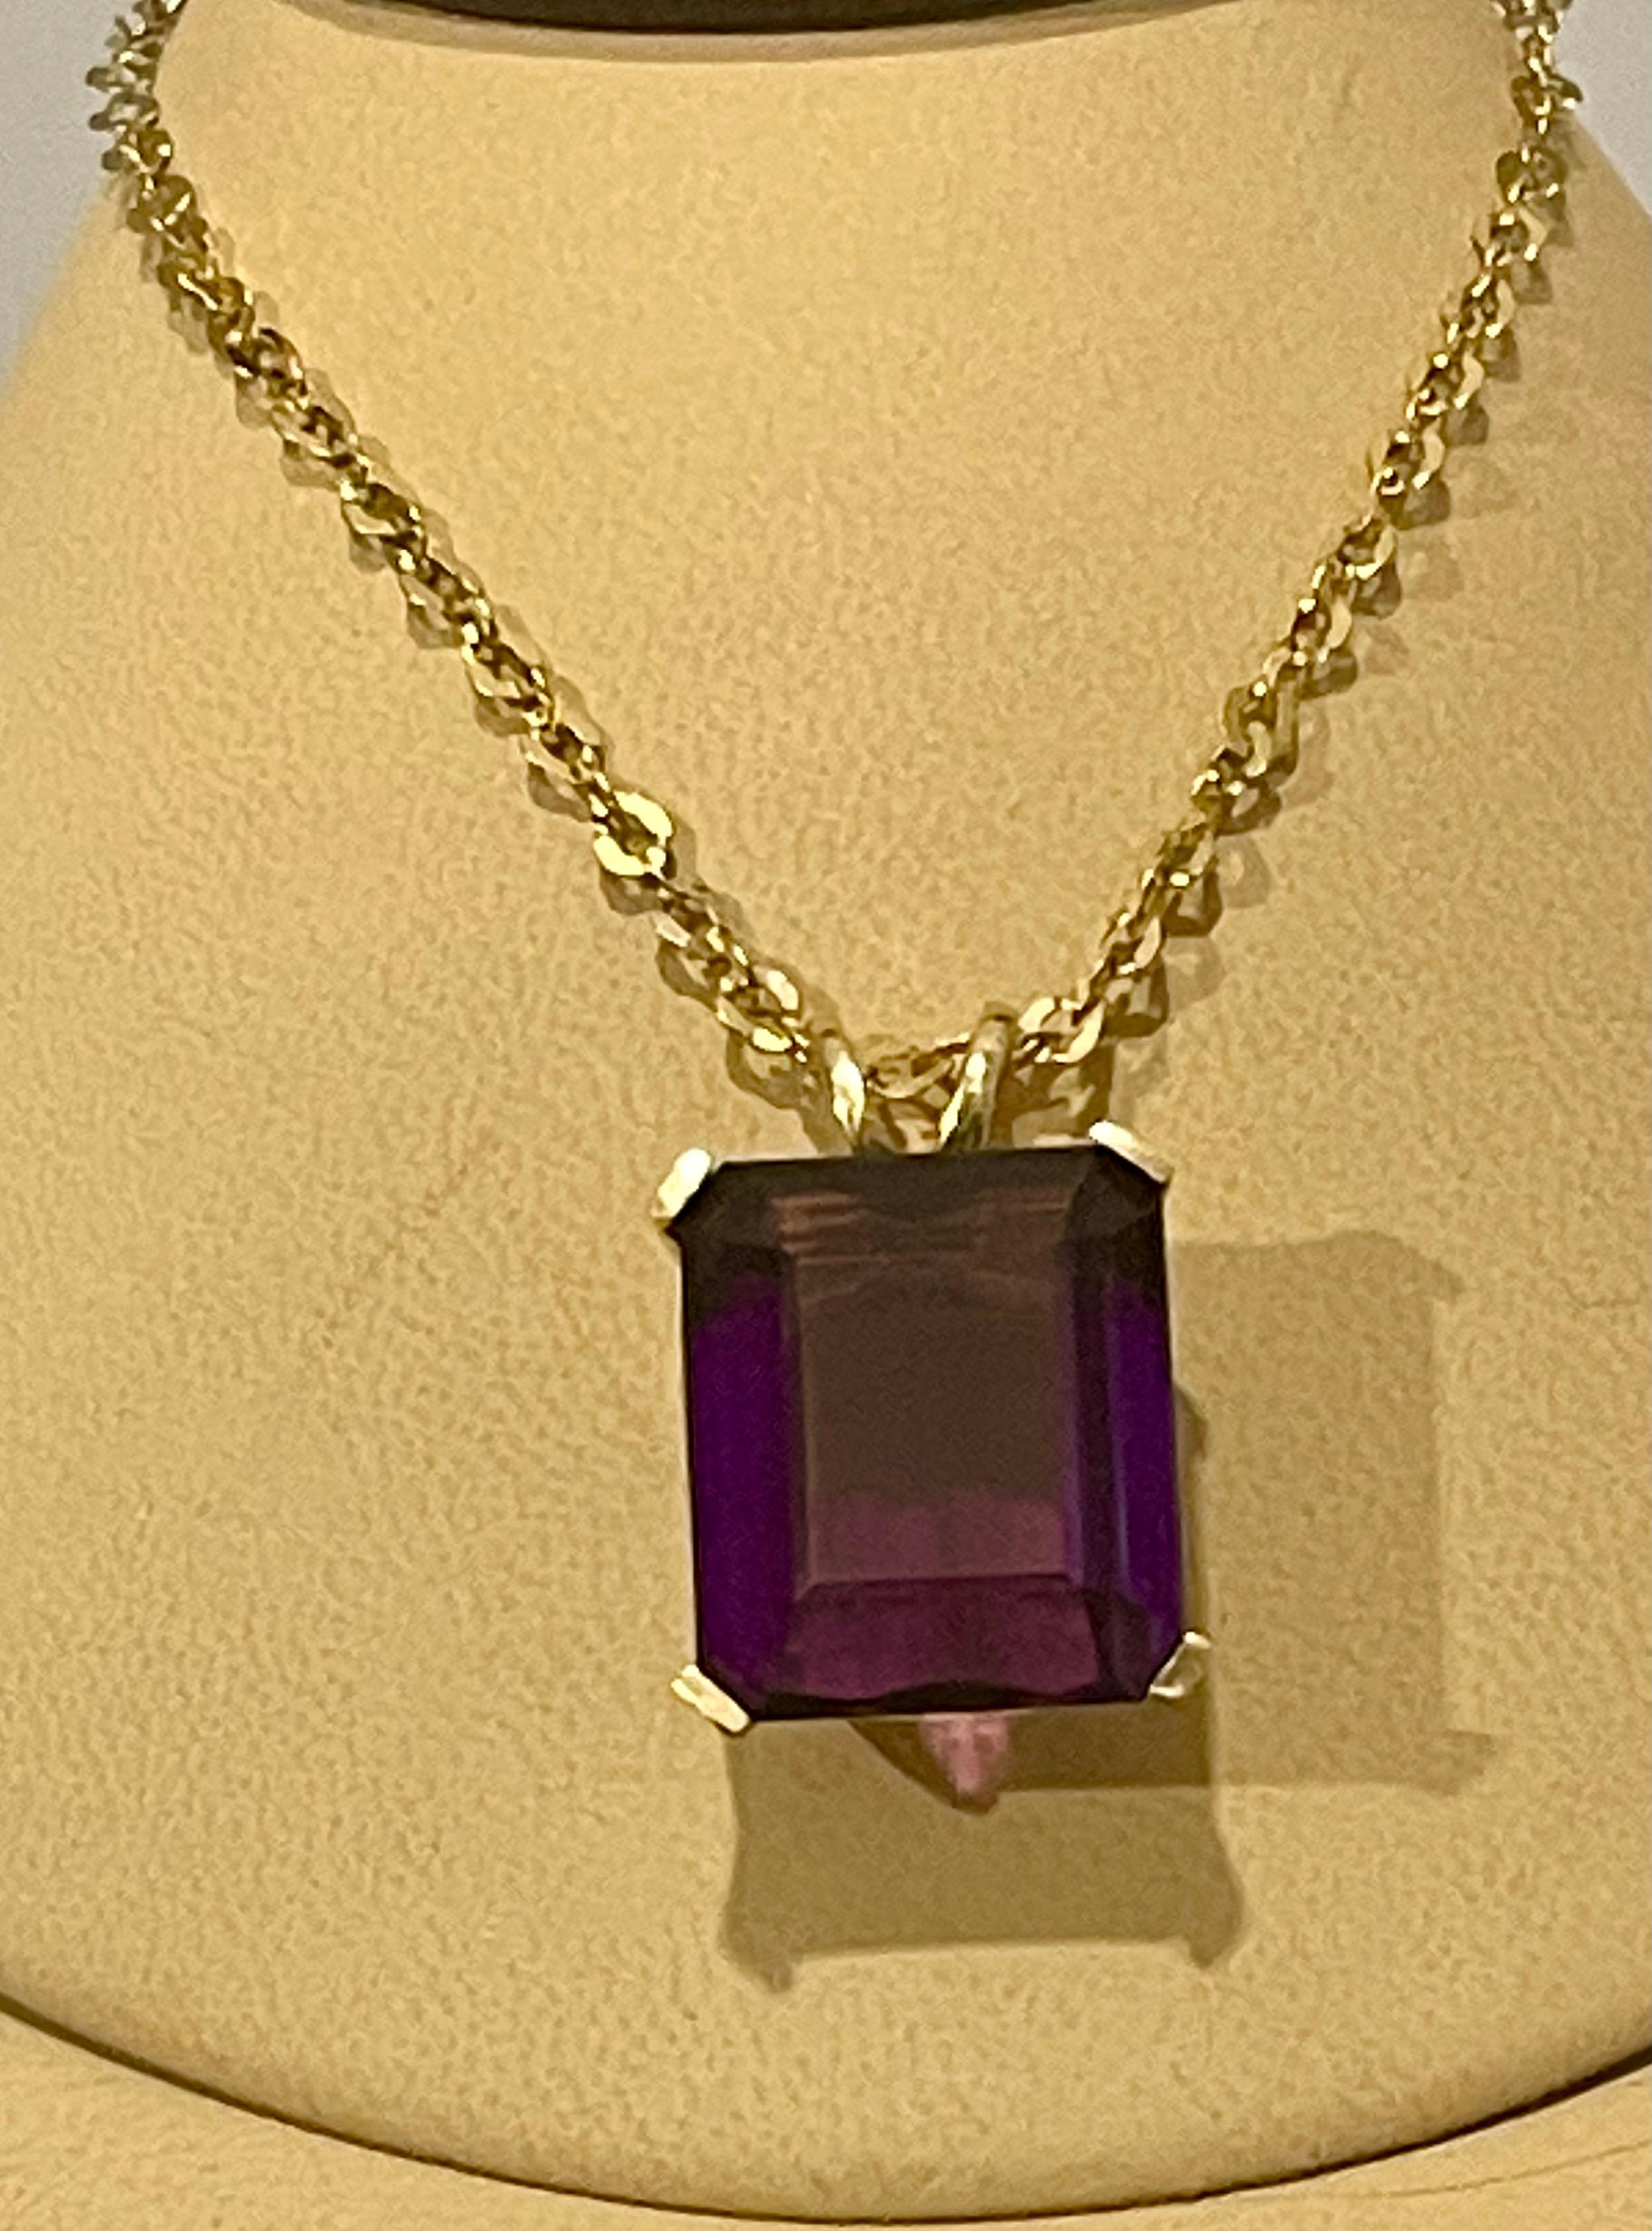 42 Ct Emerald Cut Amethyst Pendant /Necklace + 14 Kt Yellow Gold Chain Vintage 8